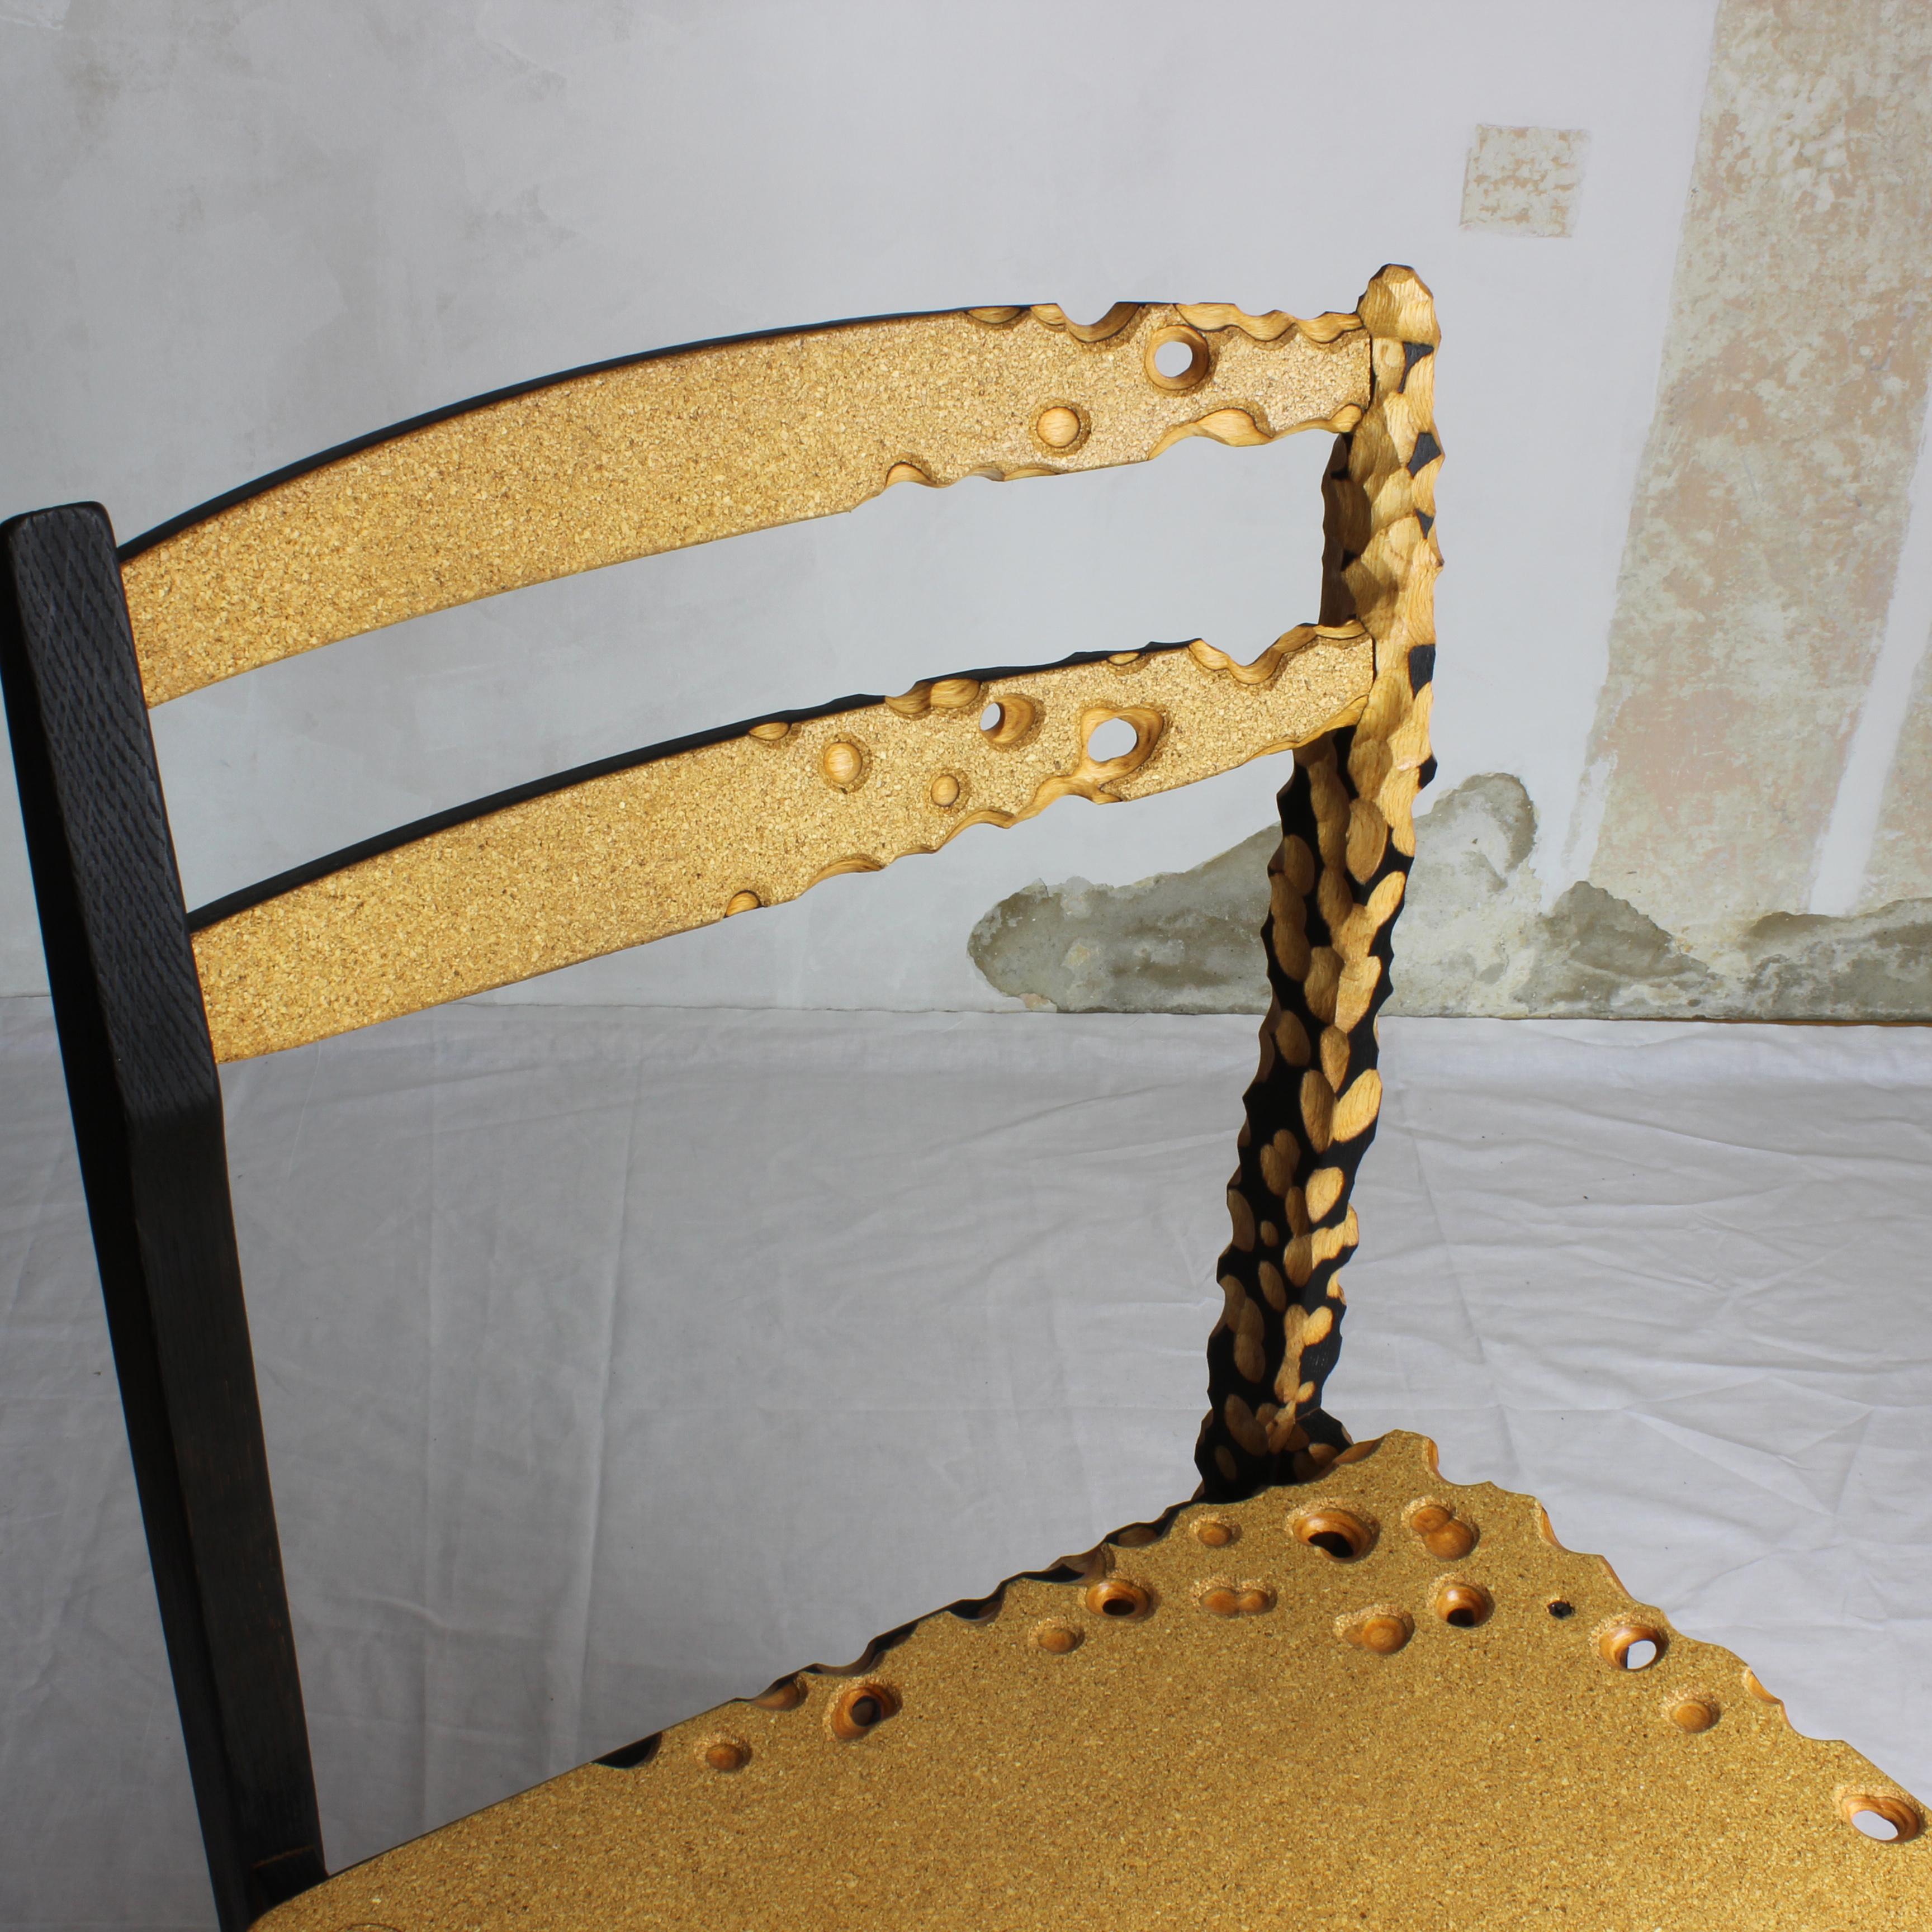 Wood N1 Chair, Unique Sculptured, Charred Furniture, from Salvaged Chair and Cork For Sale